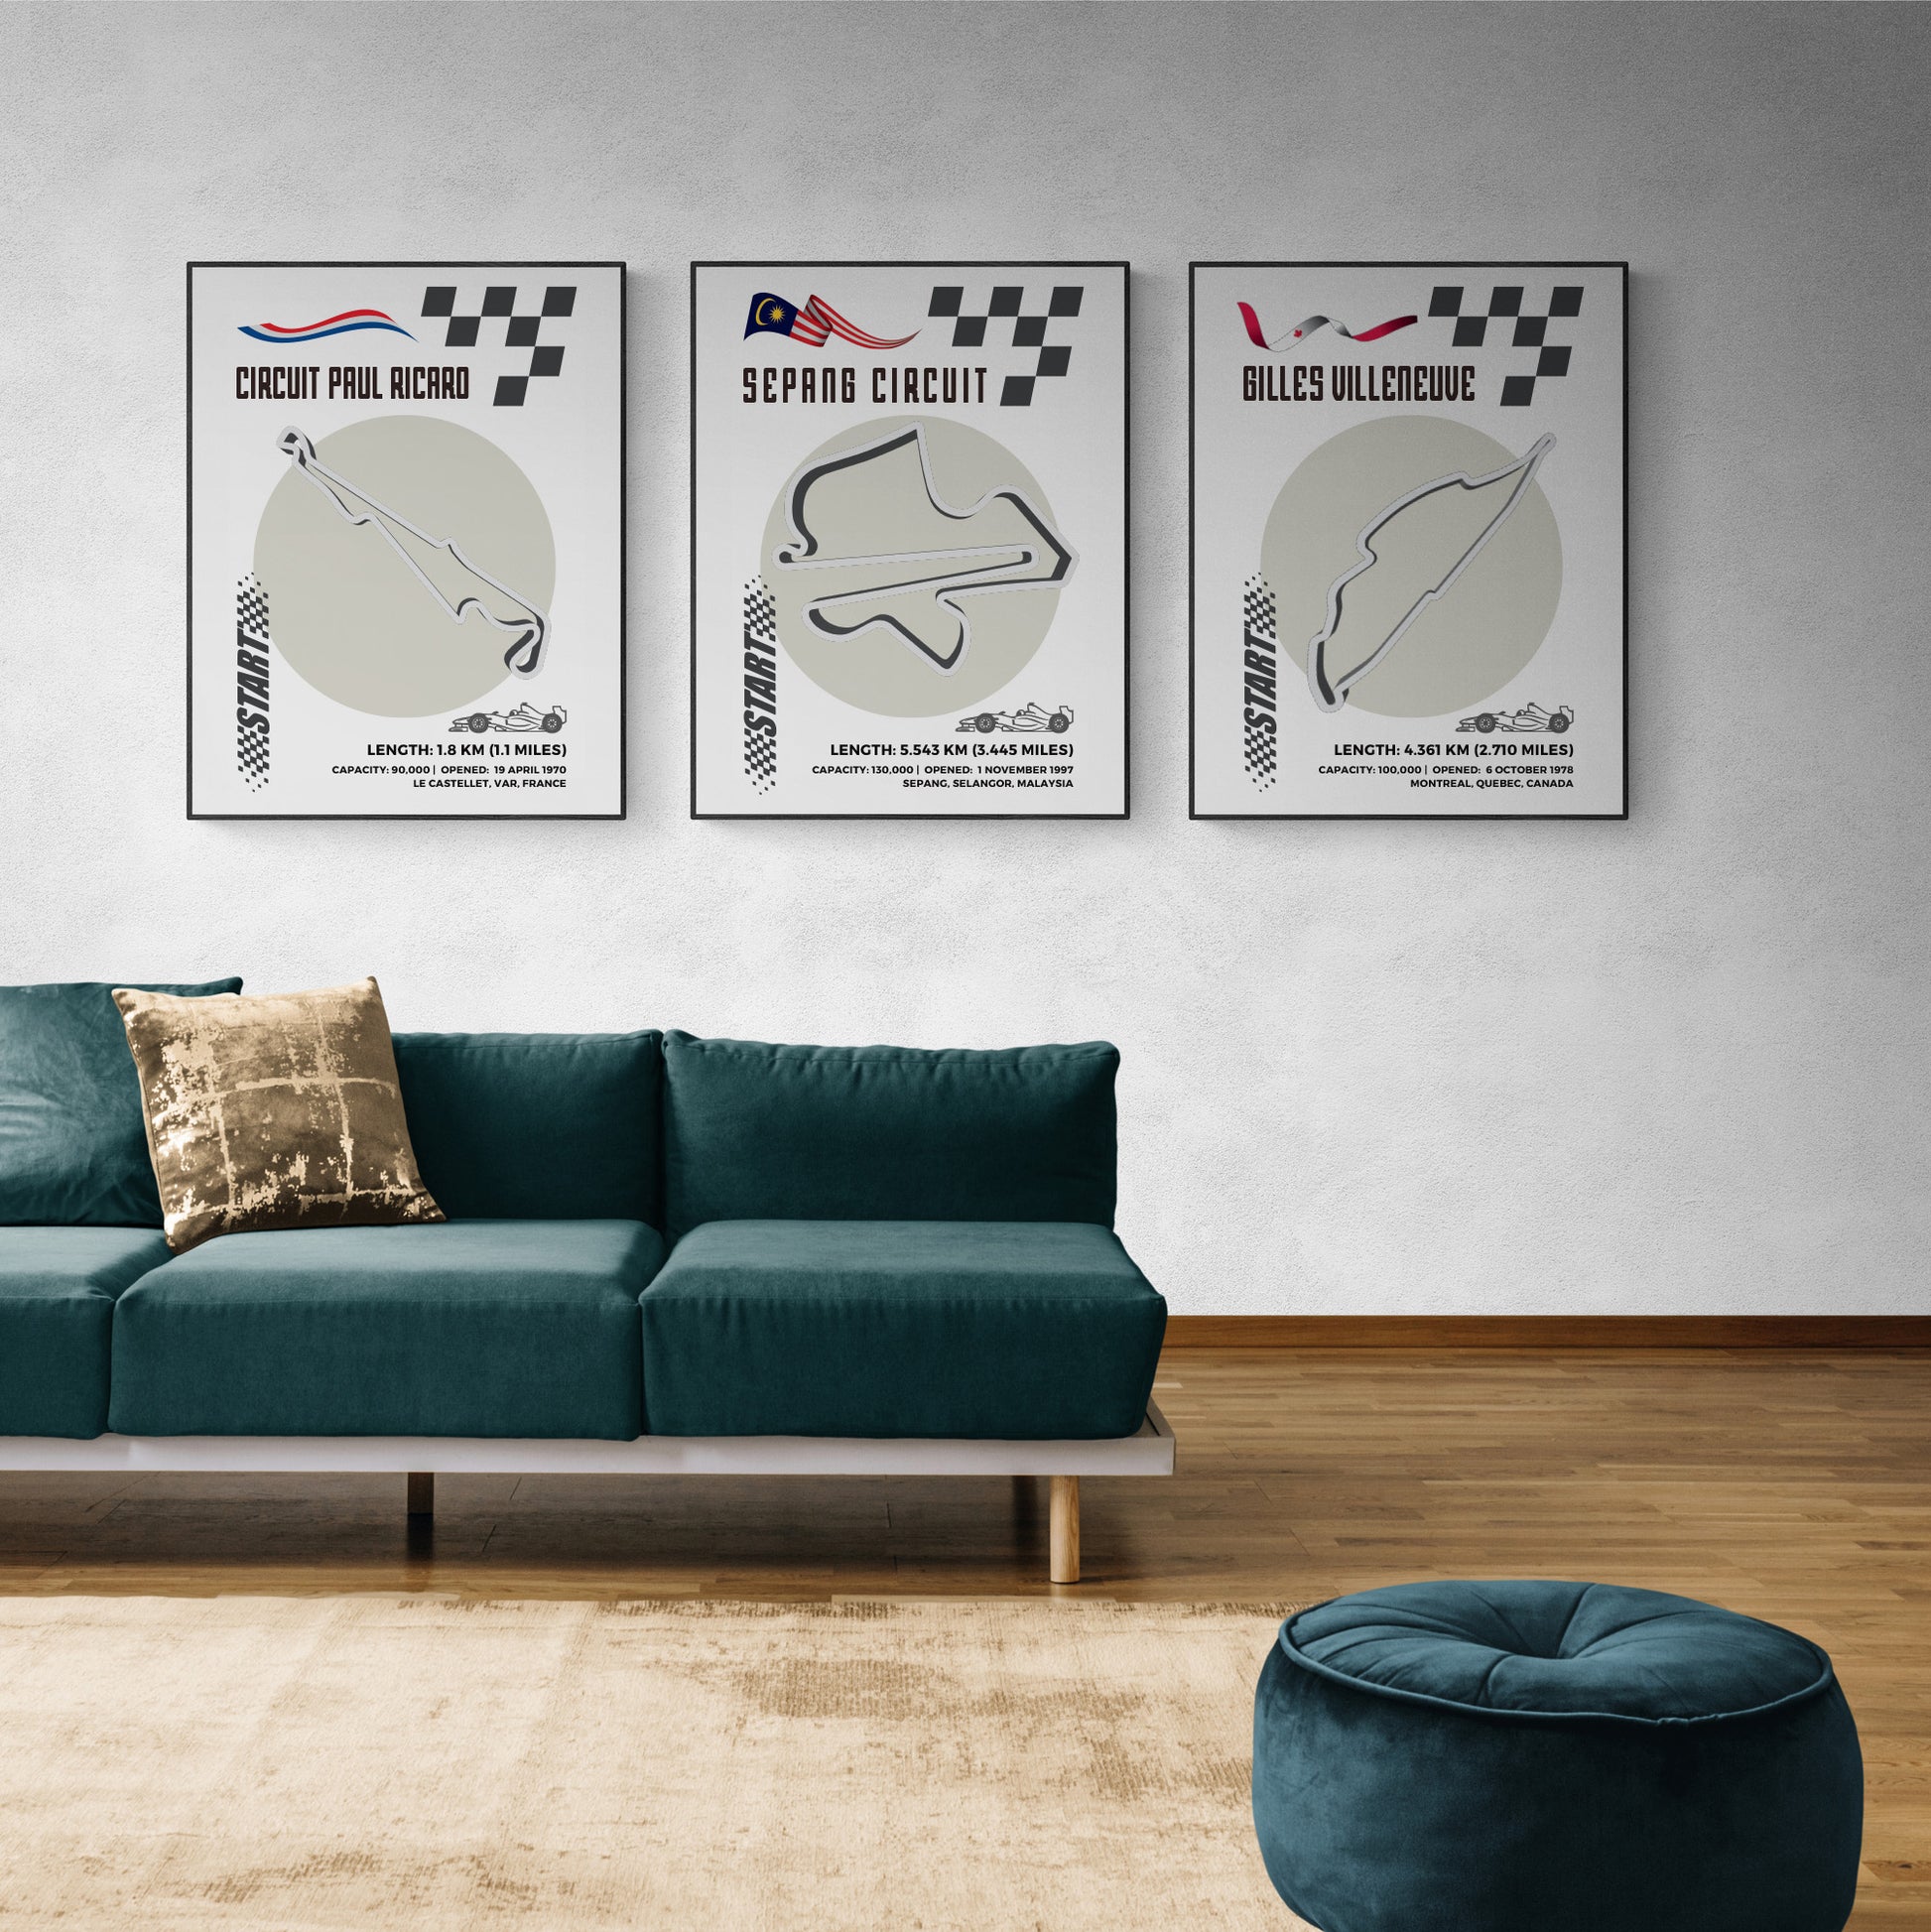 Transform any room into an F1 fan's paradise with our Hungaroring Circuit F1 Italy posters. Made from age-resistant matte premium paper, these posters feature detailed information about the circuit's history, construction, location, and notable moments. A must-have for any F1 enthusiast, complete the look with our "Formula One Poster" for a true racing experience.